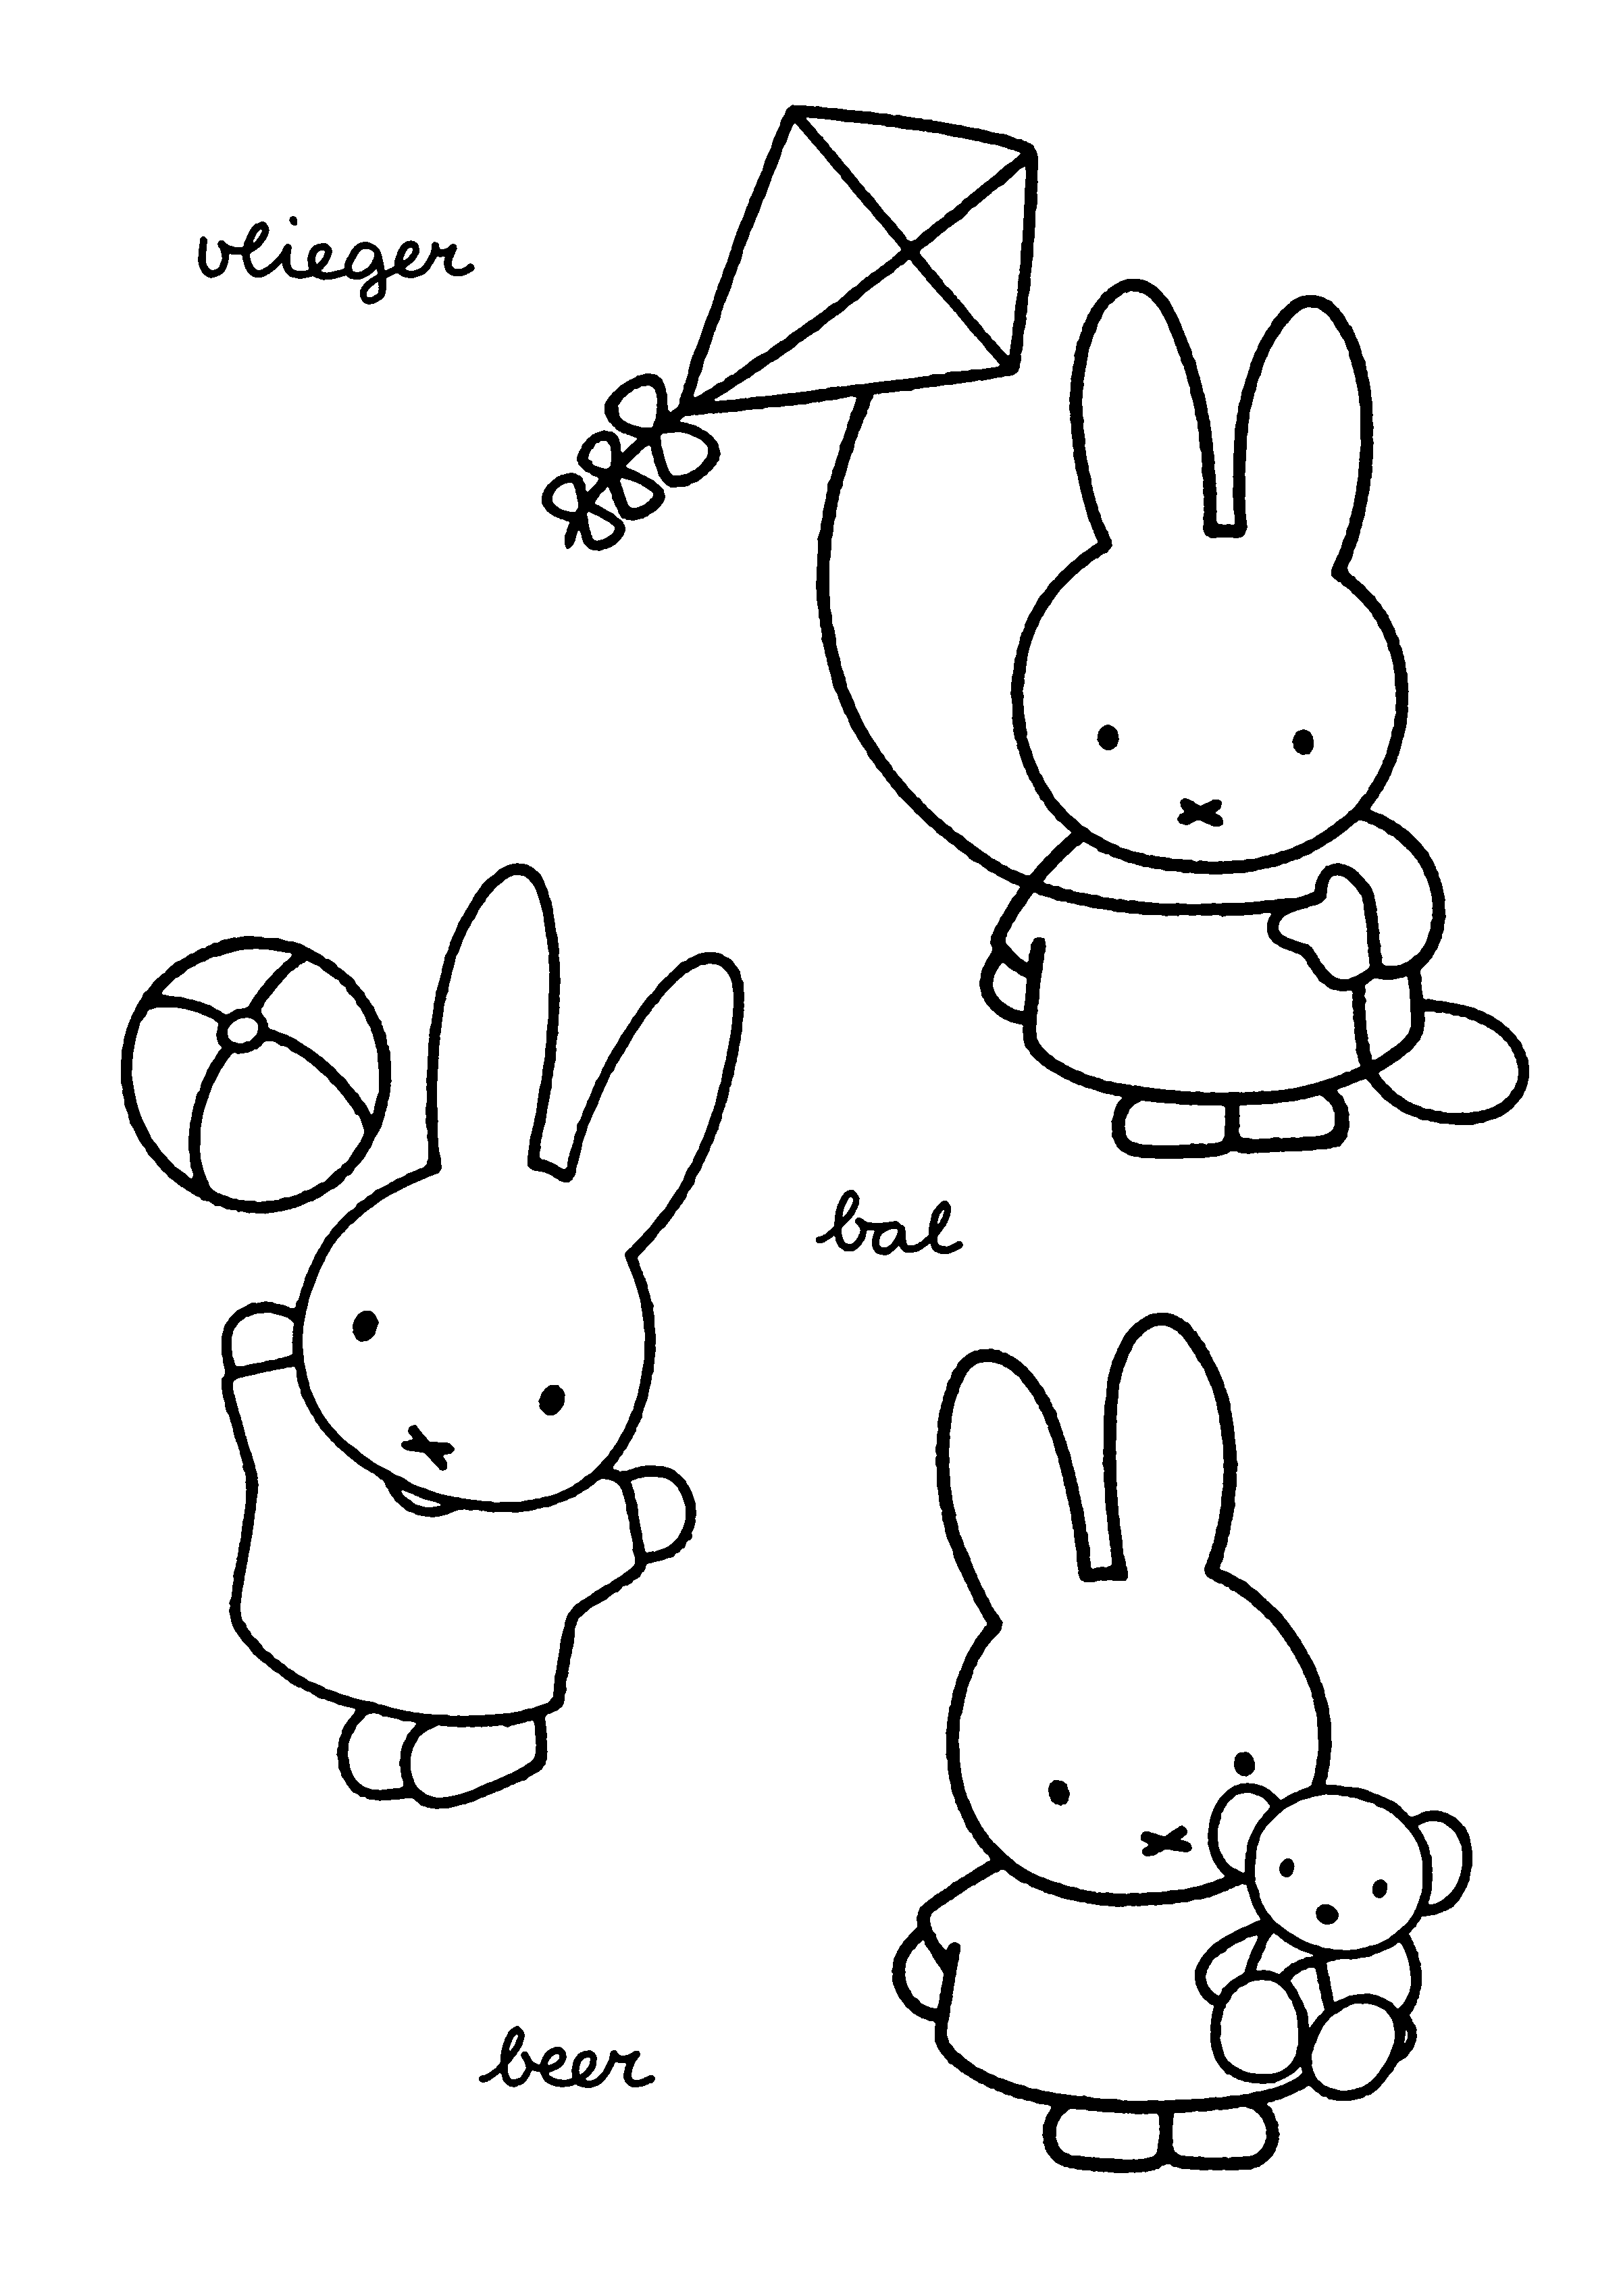 Miffy Coloring Pages - Coloringpages1001.com